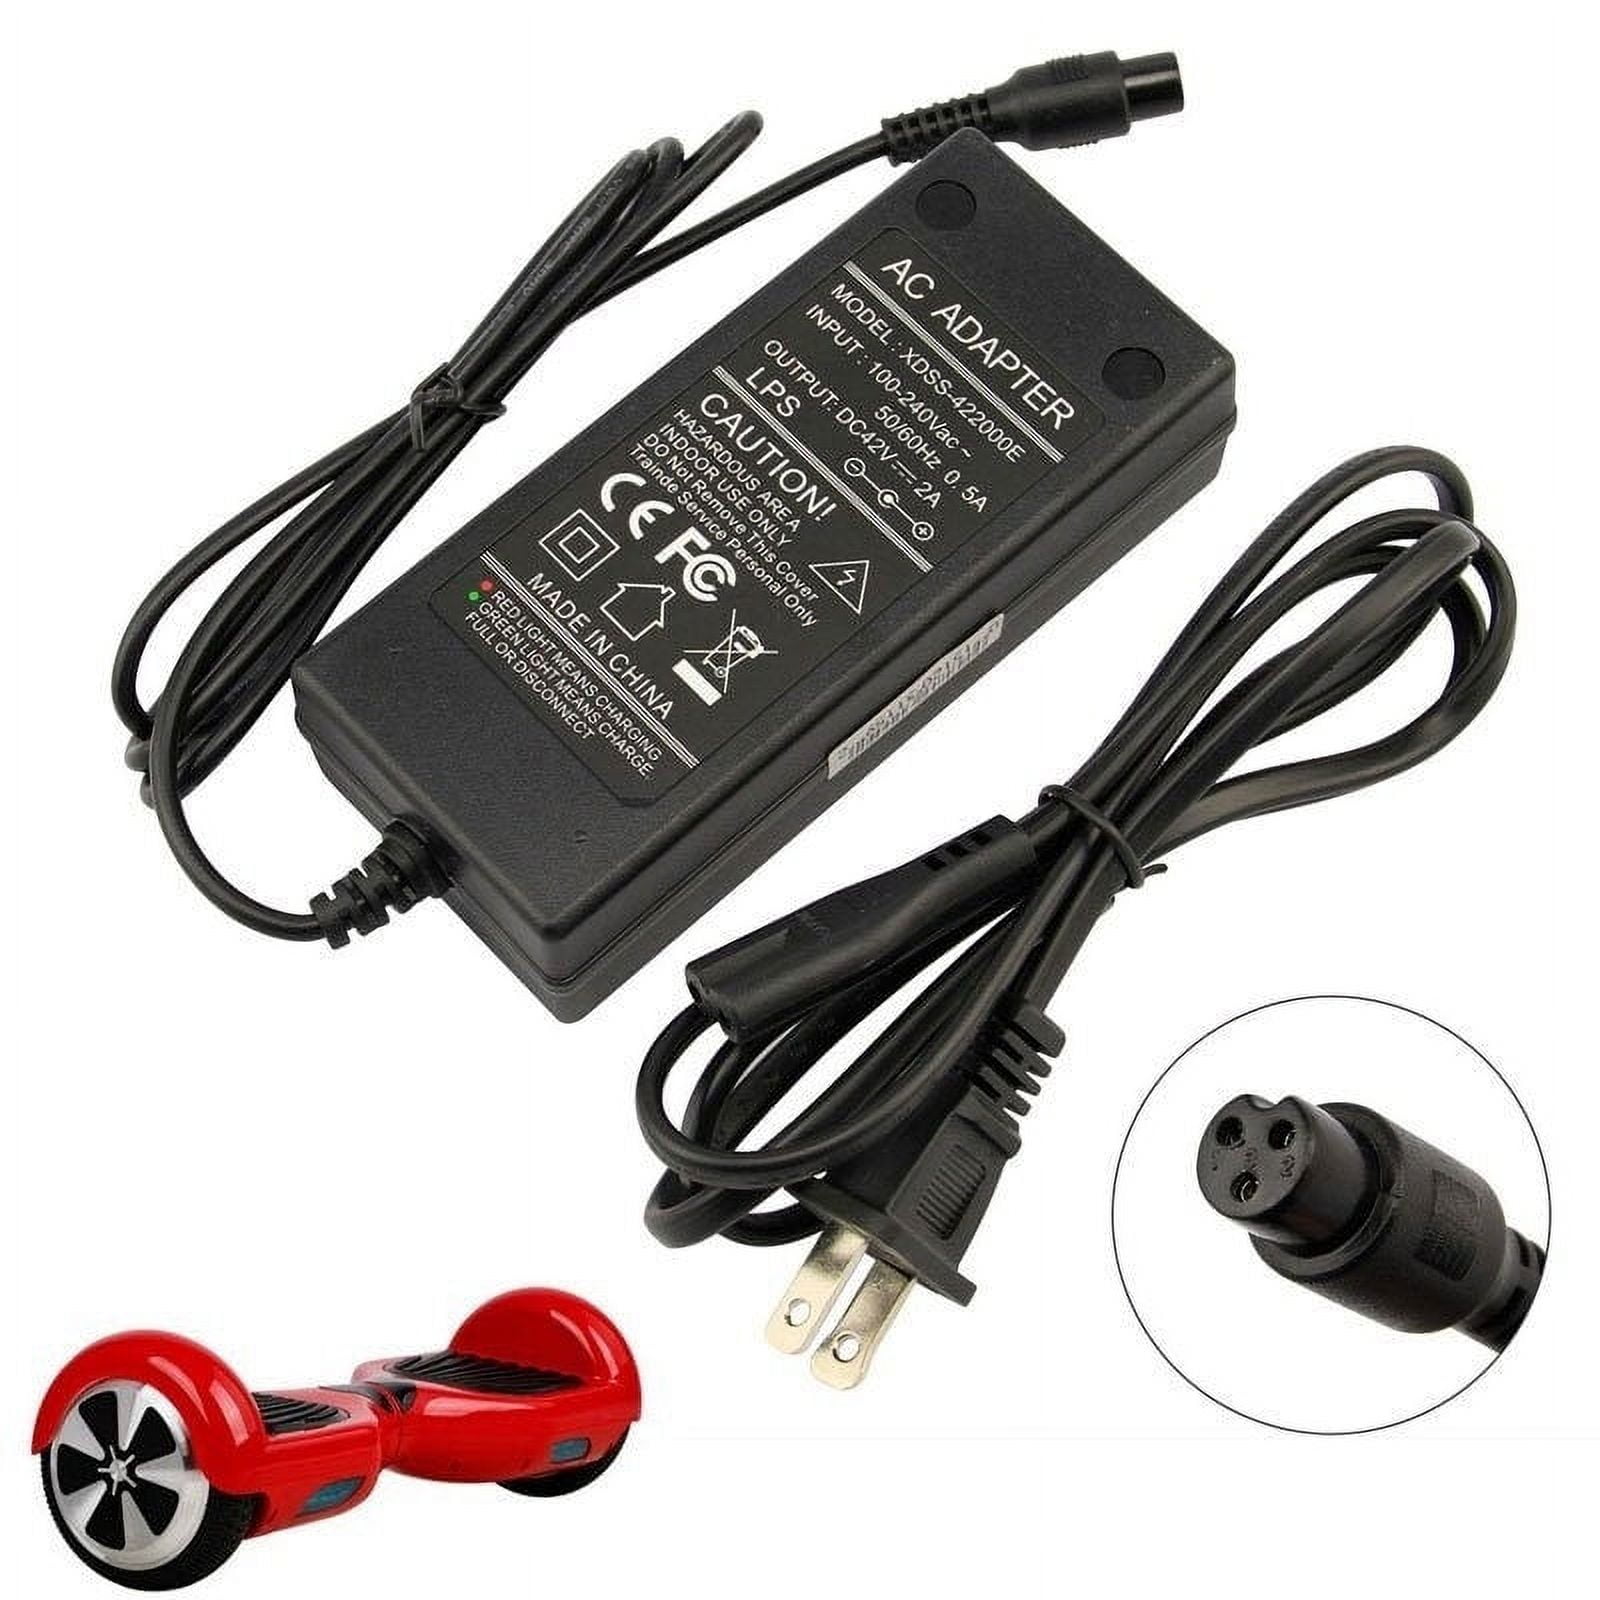 Hoverboard Charger, Shop Today. Get it Tomorrow!